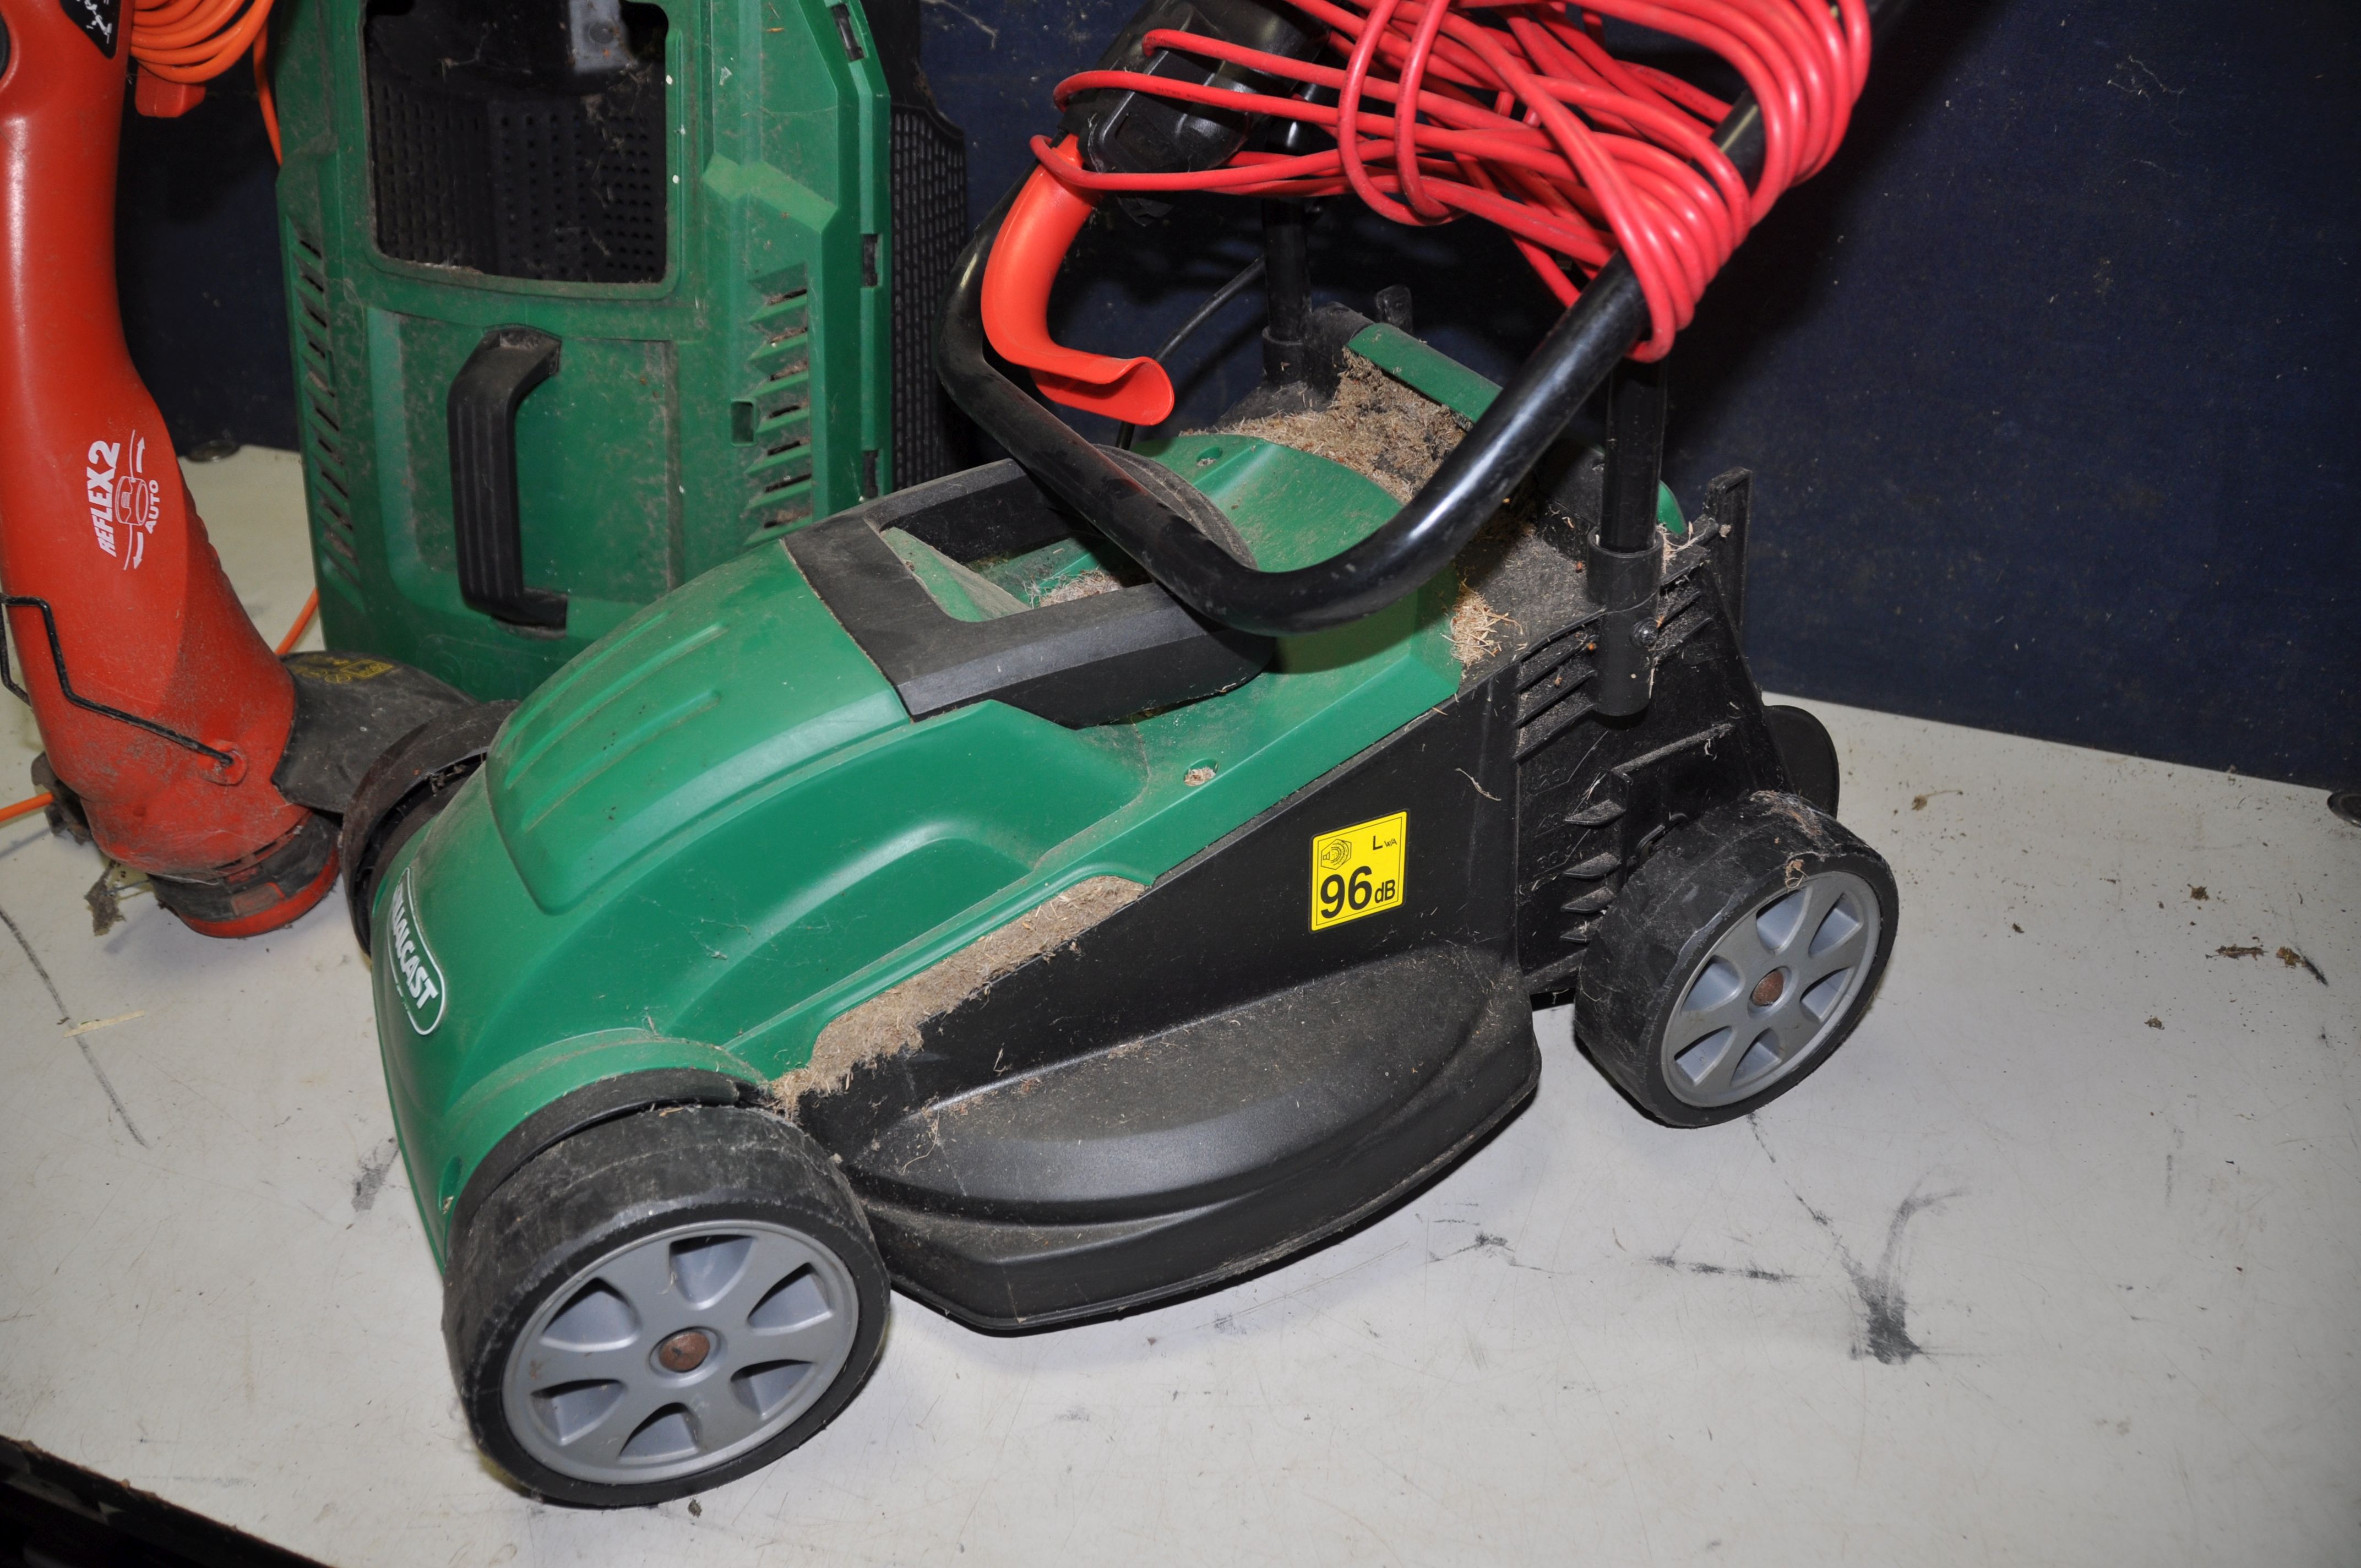 A QUALCAST M2E1232M LAWN MOWER with grass box and a Black and Decker GL315 reflex 2 strimmer (both - Image 2 of 3